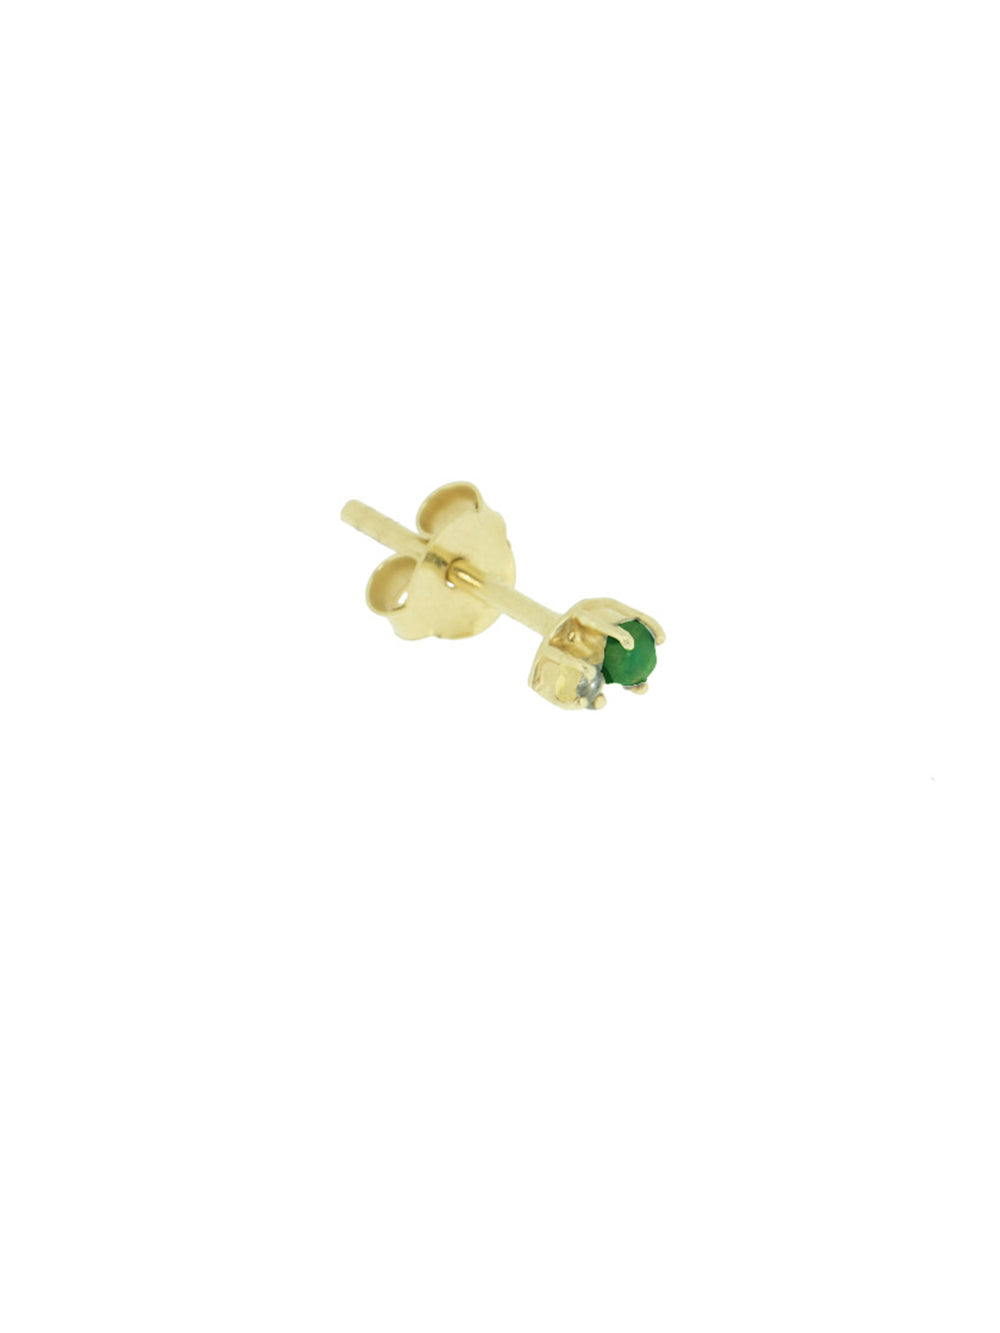 Both of us - Green Onyx | 14K Gold Plated